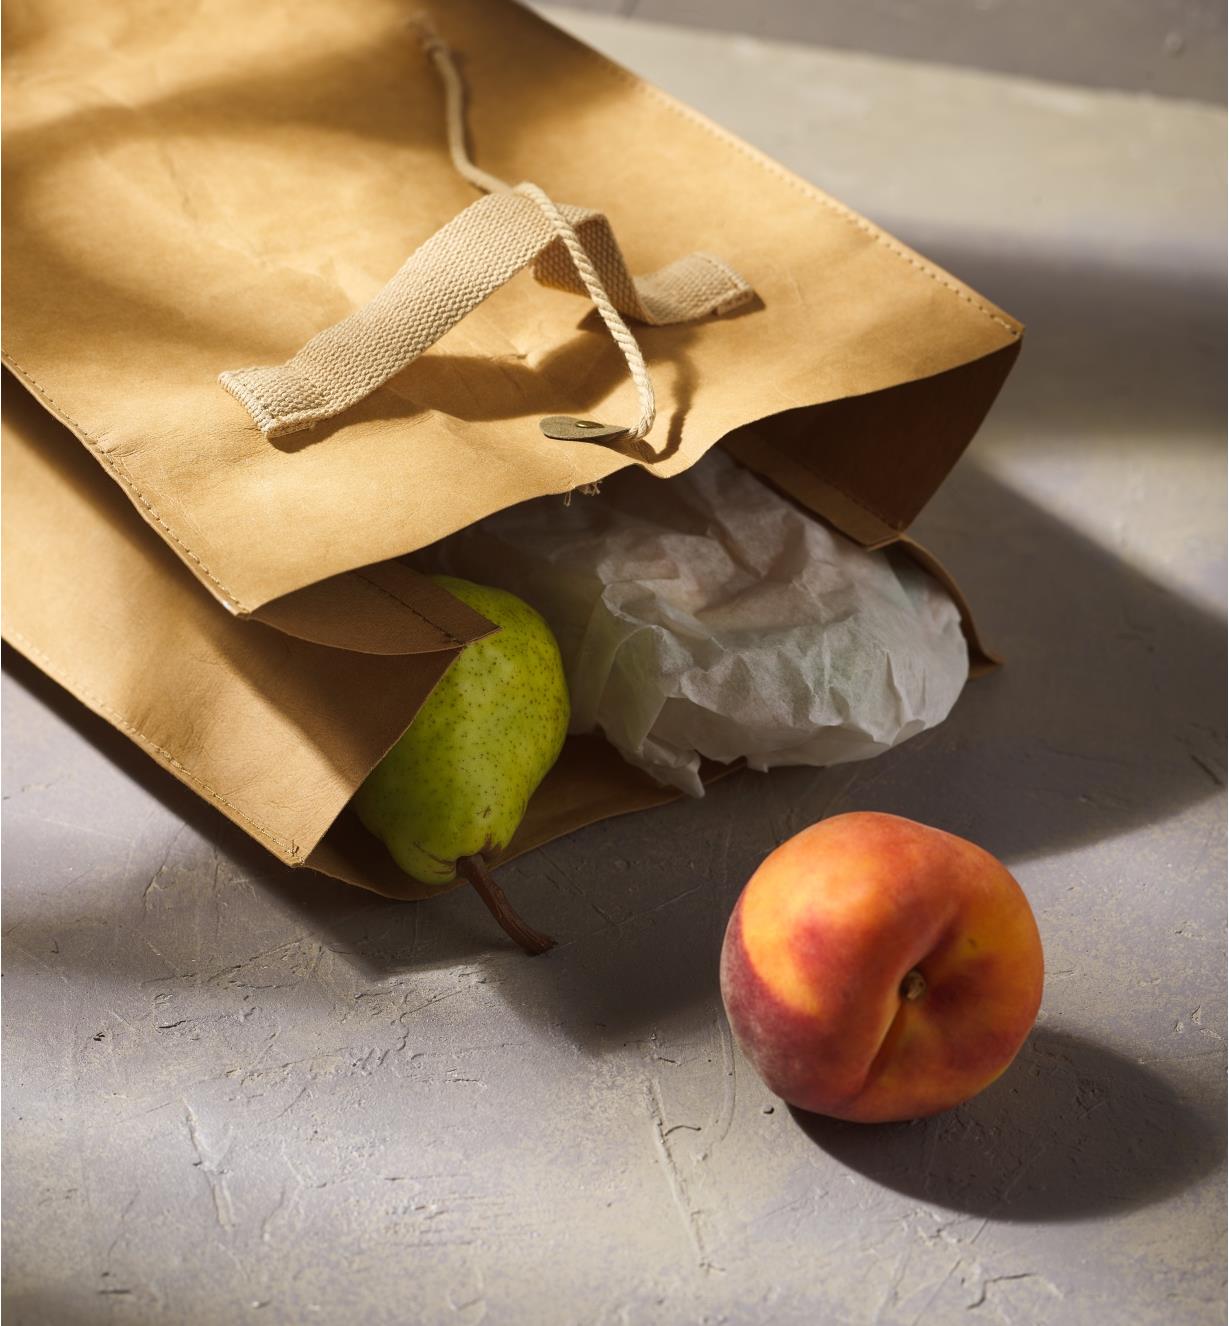 An open tree leather lunch bag lying on its side to dispense the contents